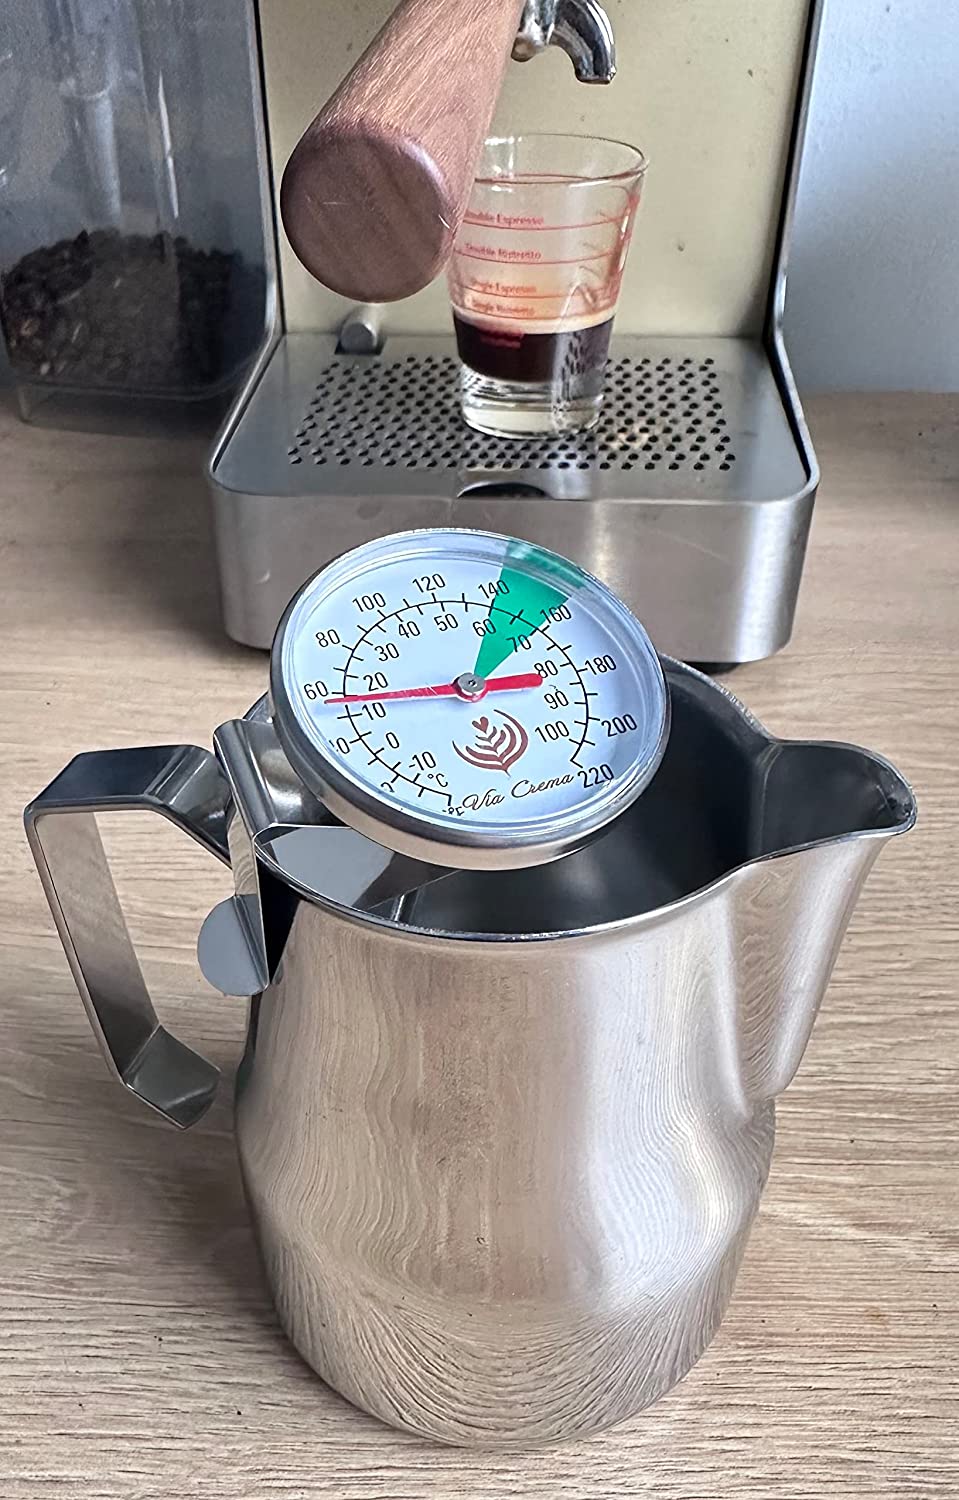 Stainless Steel Milk Jug Special Latte Capuccino Art Spout - Made In Italy By Motta (Thermometer)